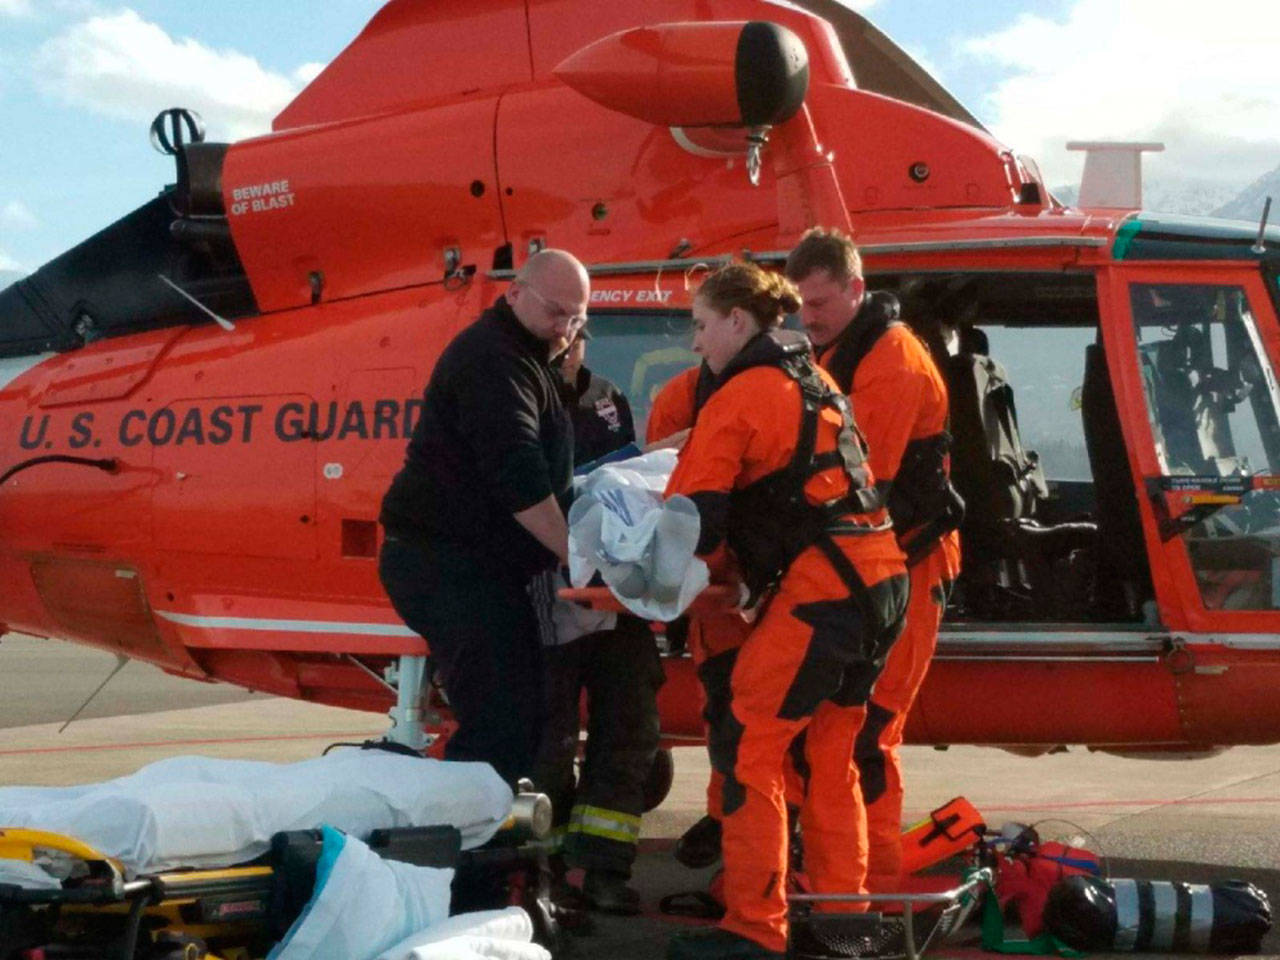 Members of a MH-65 Dolphin helicopter crew from Coast Guard Air Station/Sector Field Officer Port Angeles and emergency medical service personnel move an injured hiker to a stretcher on the air field at the air station Saturday. (Eric Mangiarelli, petty officer 3rd class/U.S. Coast Guard)